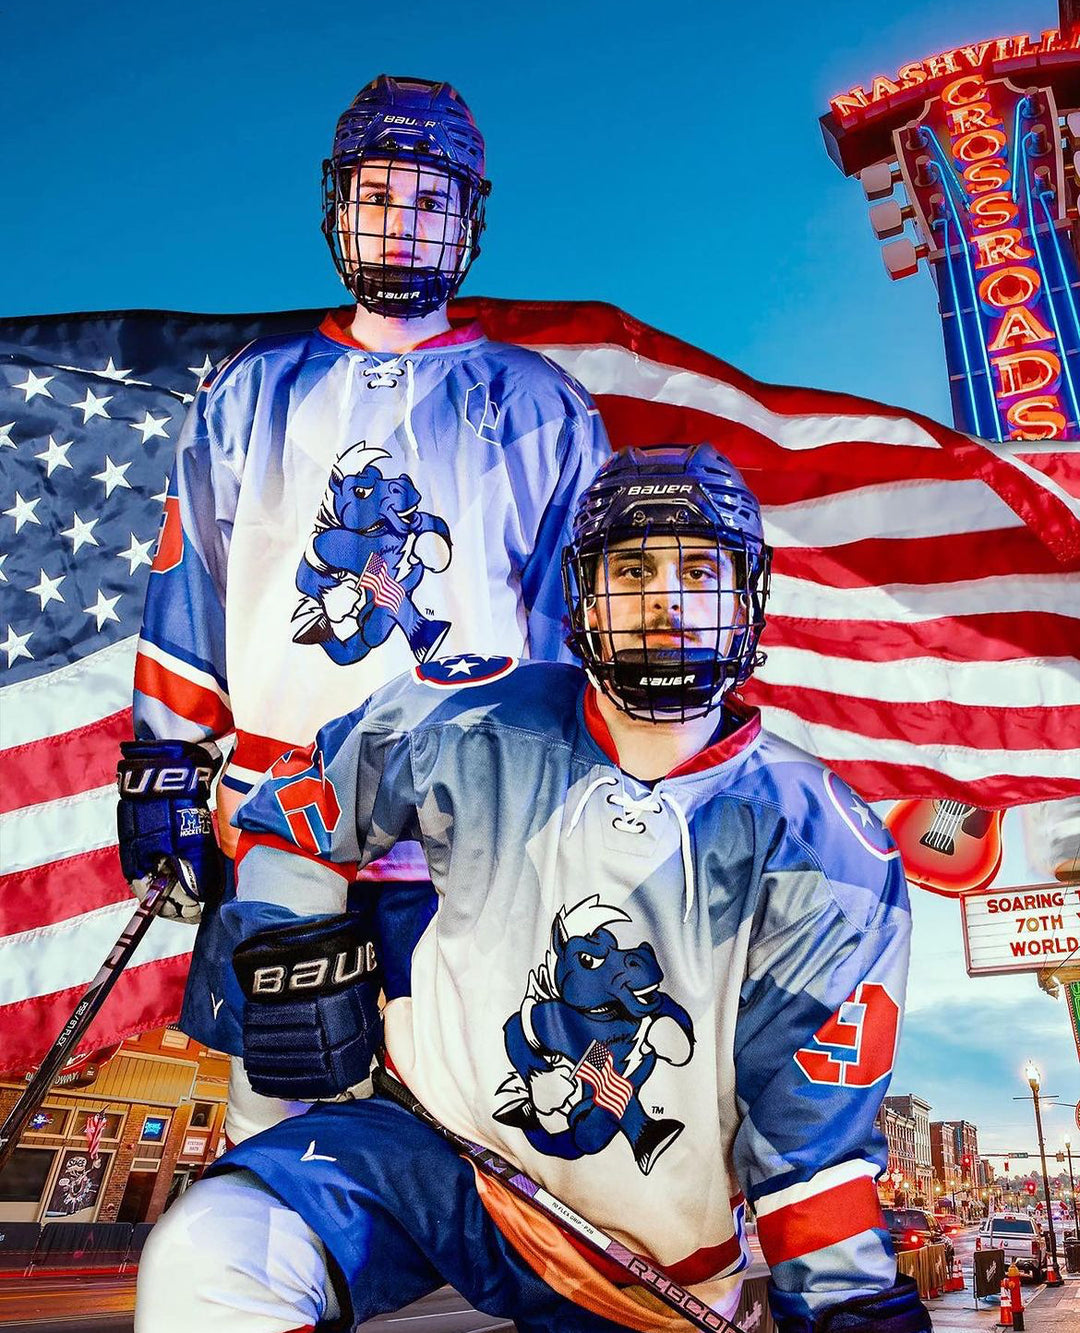 Two hockey players stand in front of an American Flag in Downtown Nashville wearing custom hockey uniforms from Verbero.